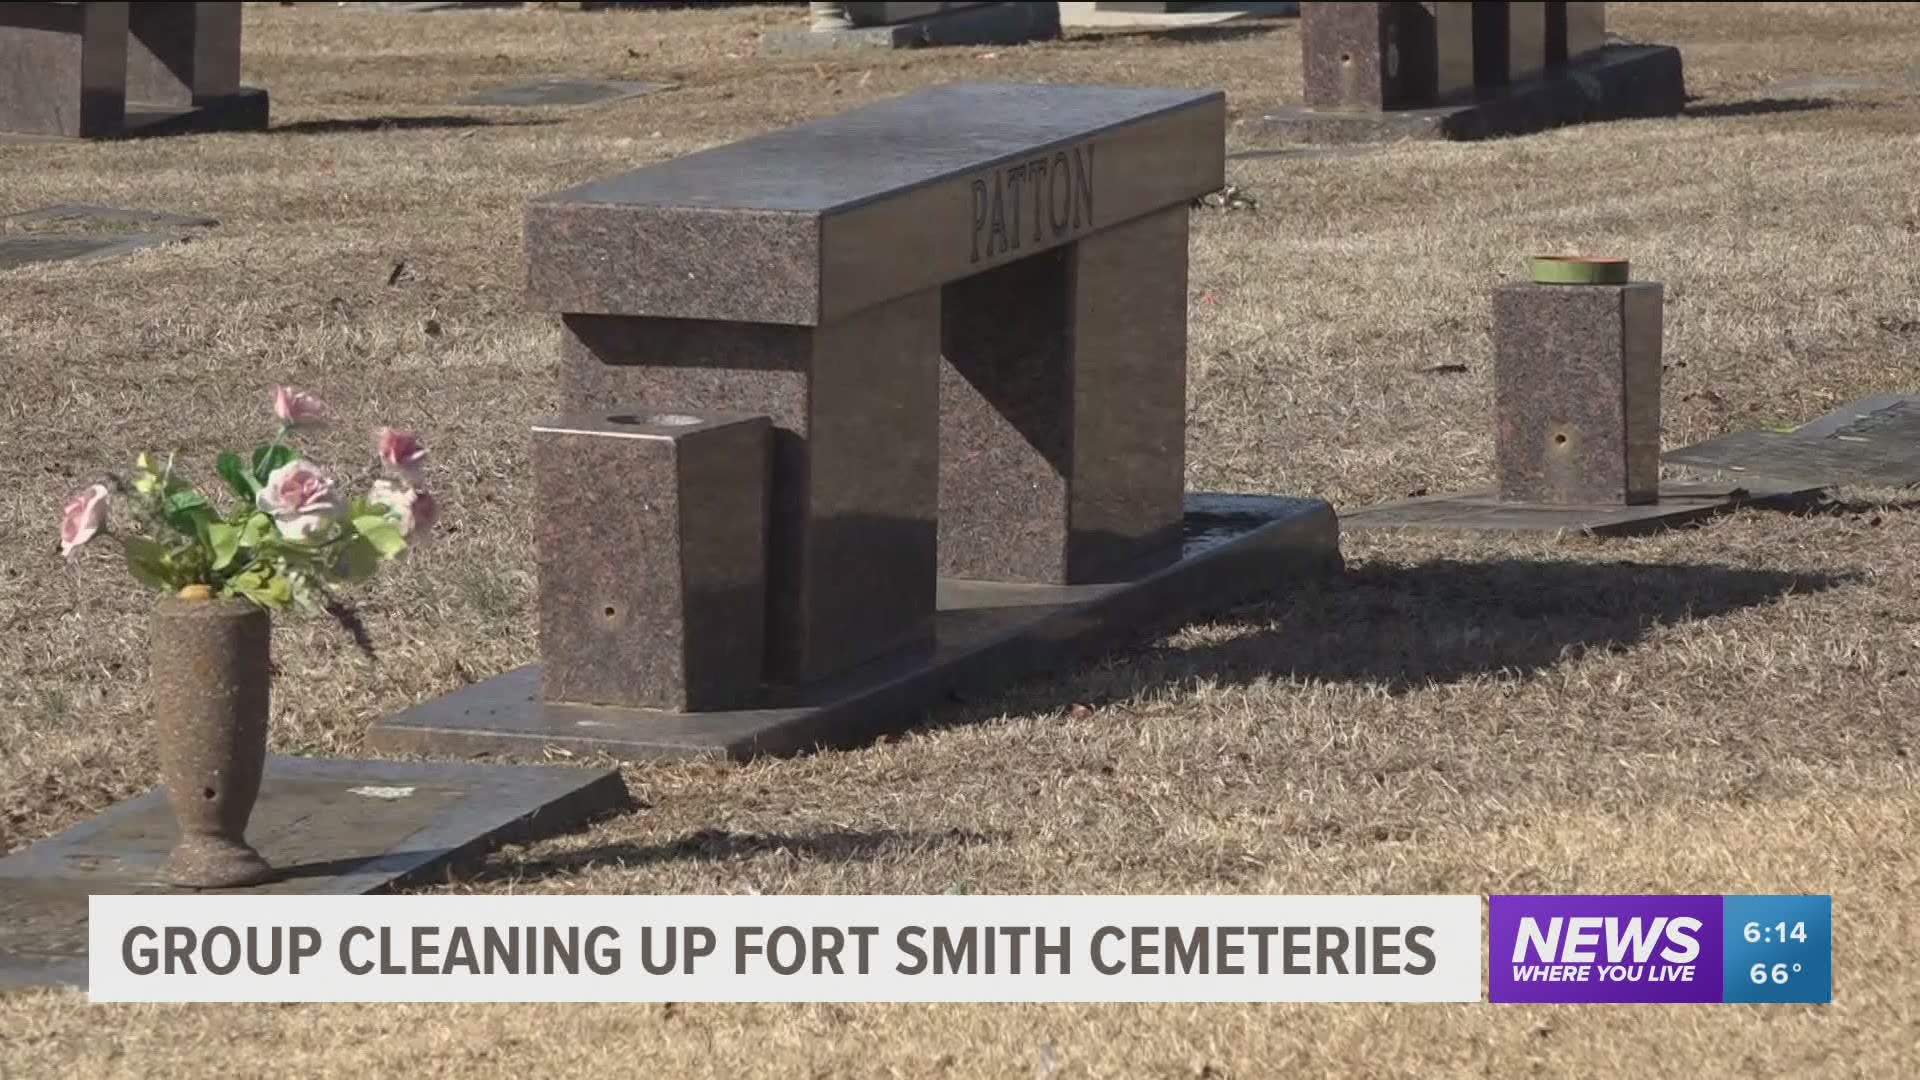 Local group helps clean up Fort Smith cemeteries